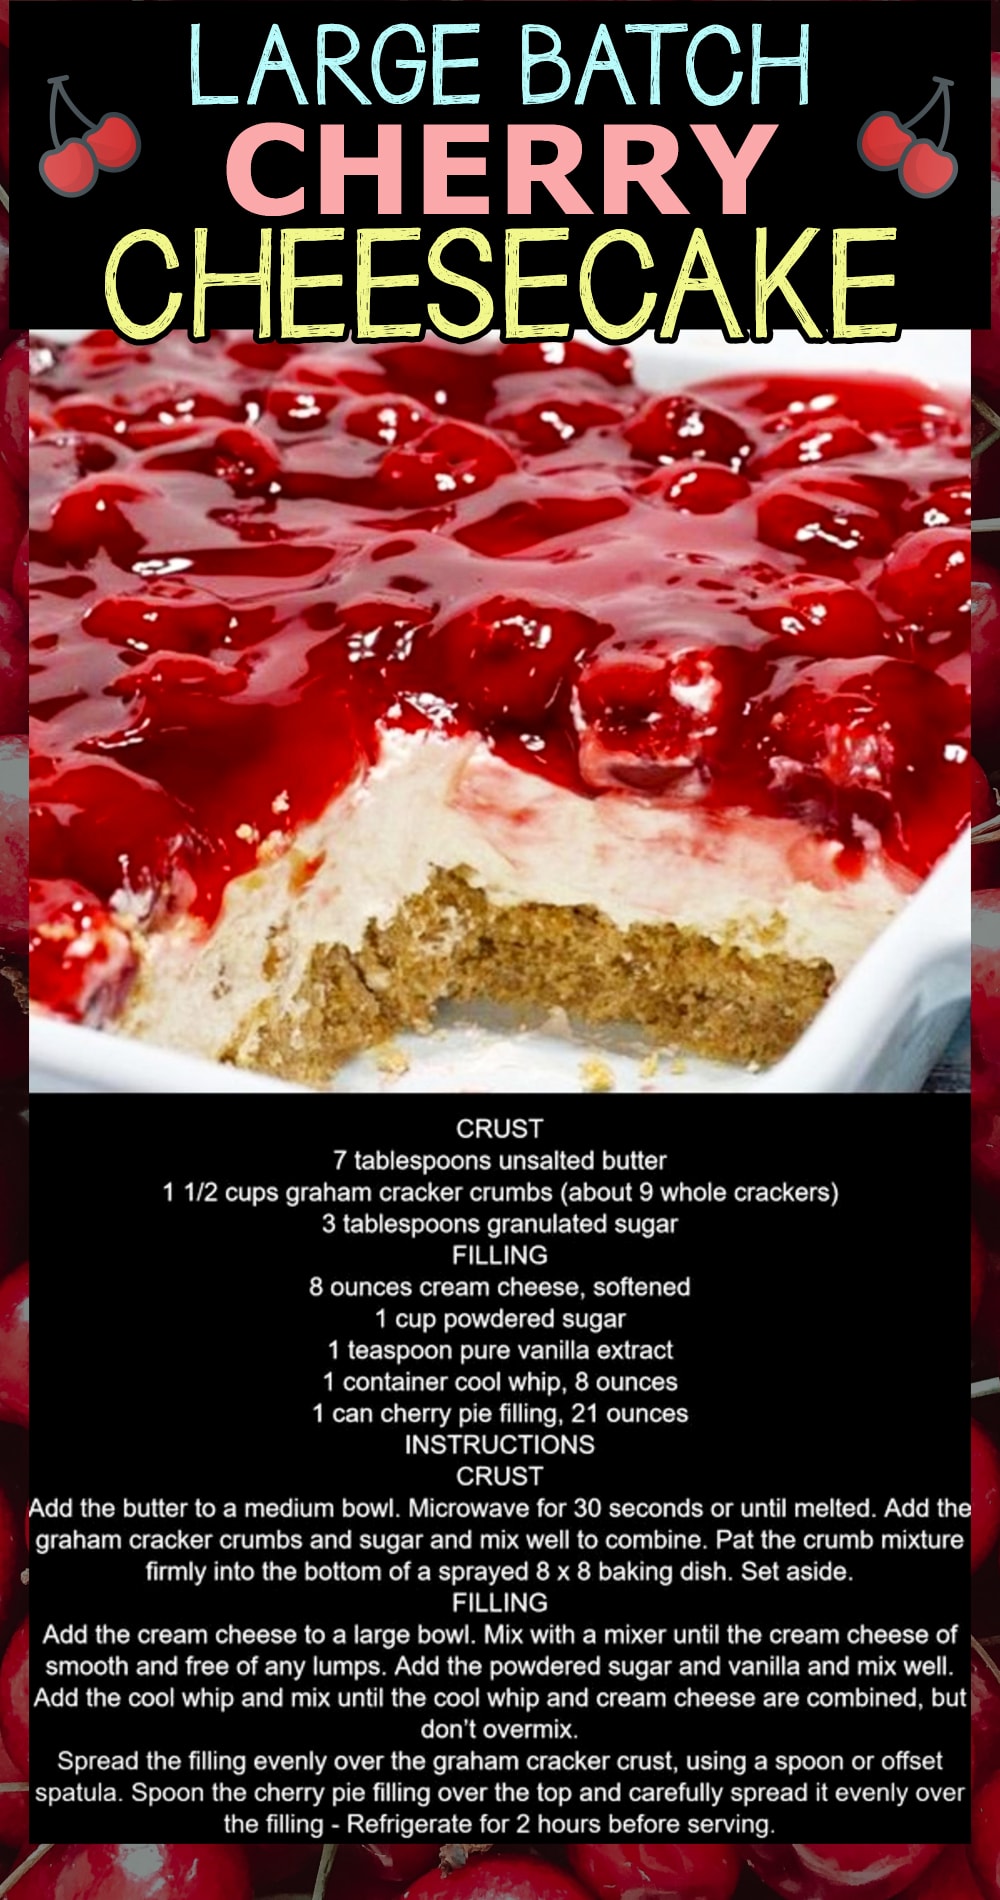 large batch cherry cheesecake for a potluck at church or work party - layered graham cracker crust with a cream cheese Cool Whip filling topped with 1 can of cherry pie filling.